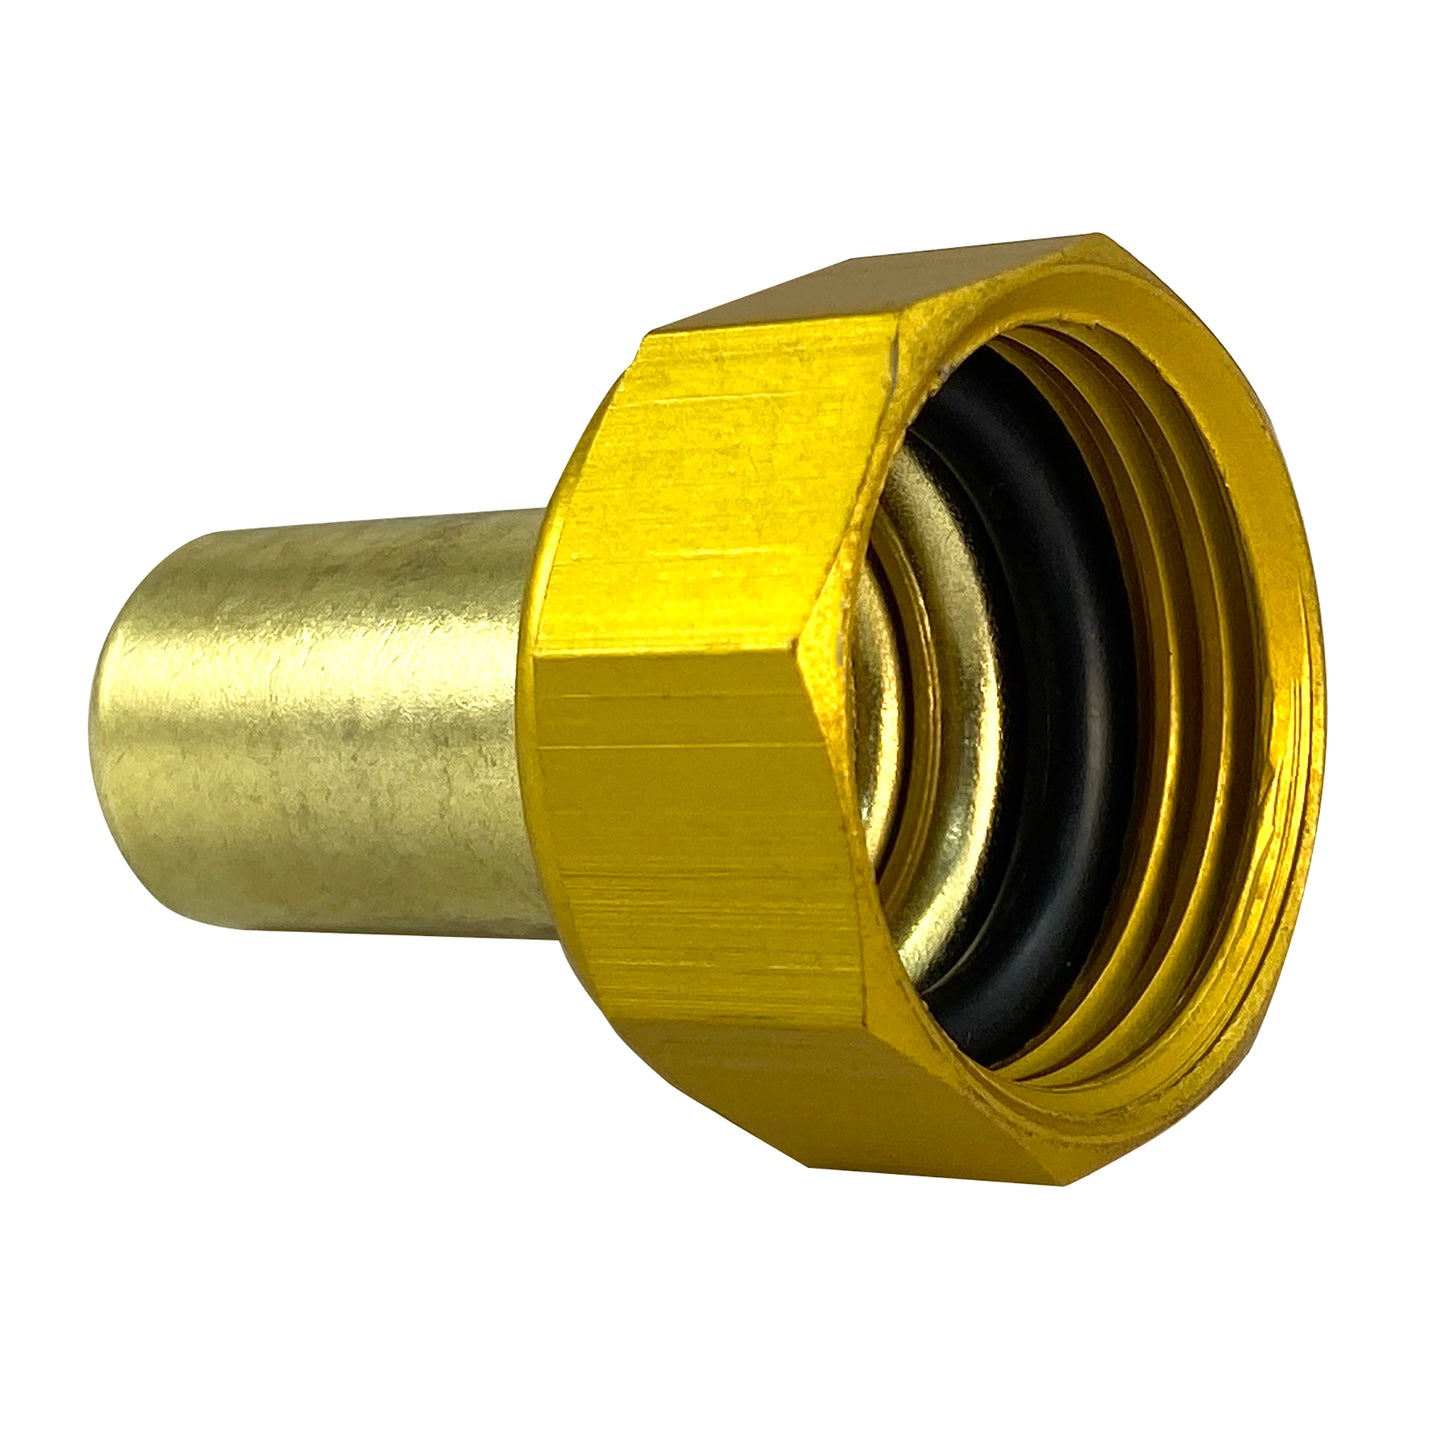 5/8" Heavy Duty Expansion Couplings